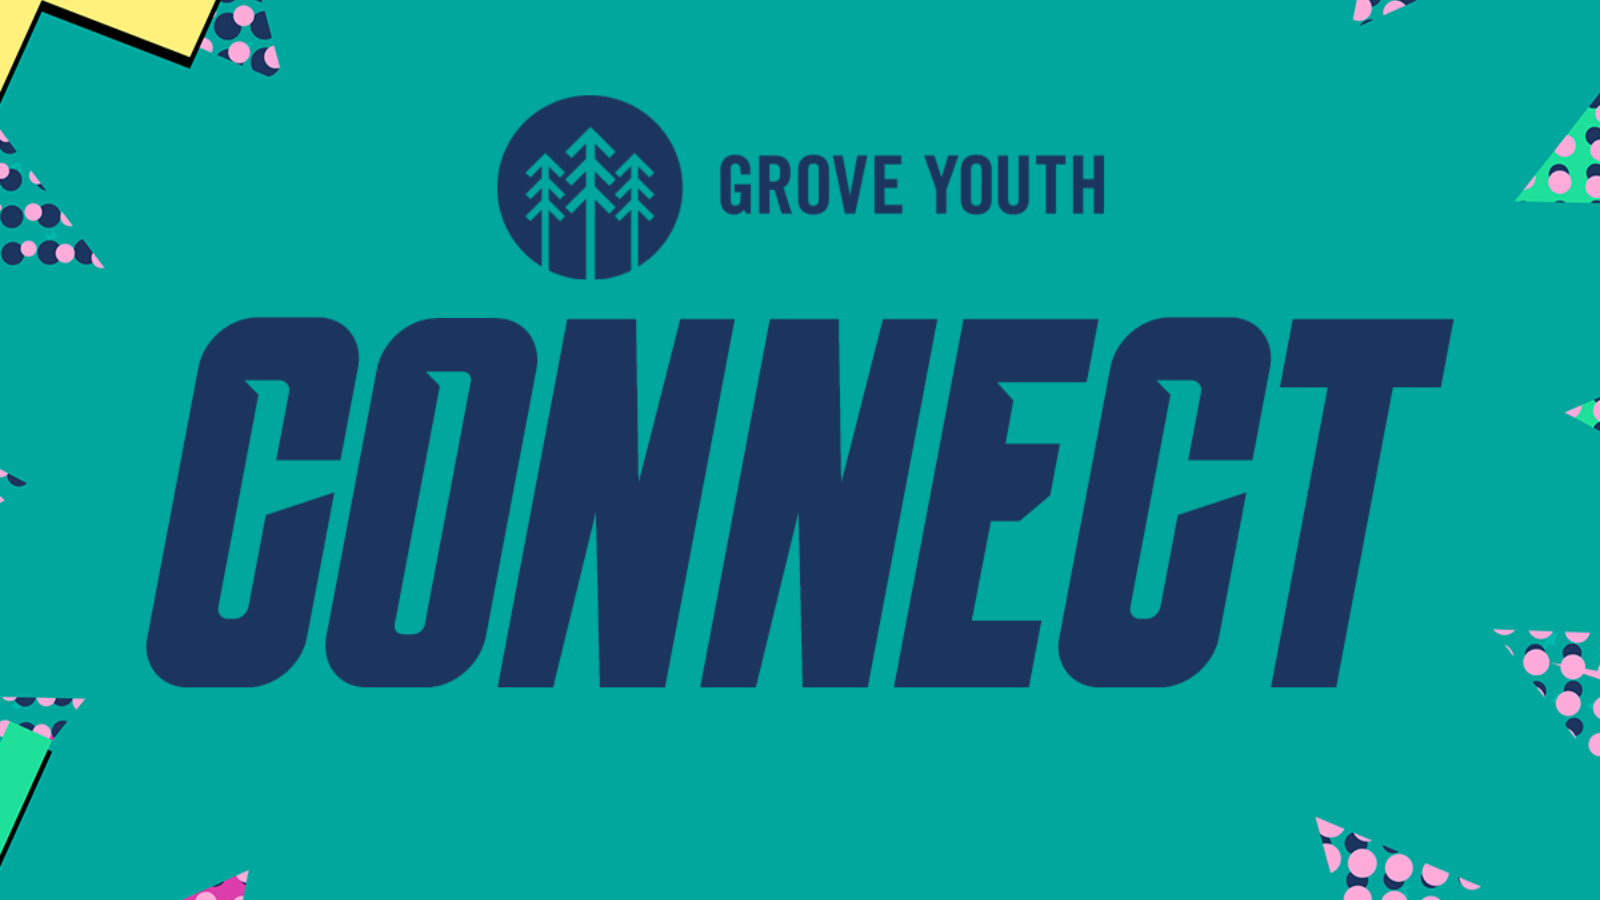 GroveYouth: Connect